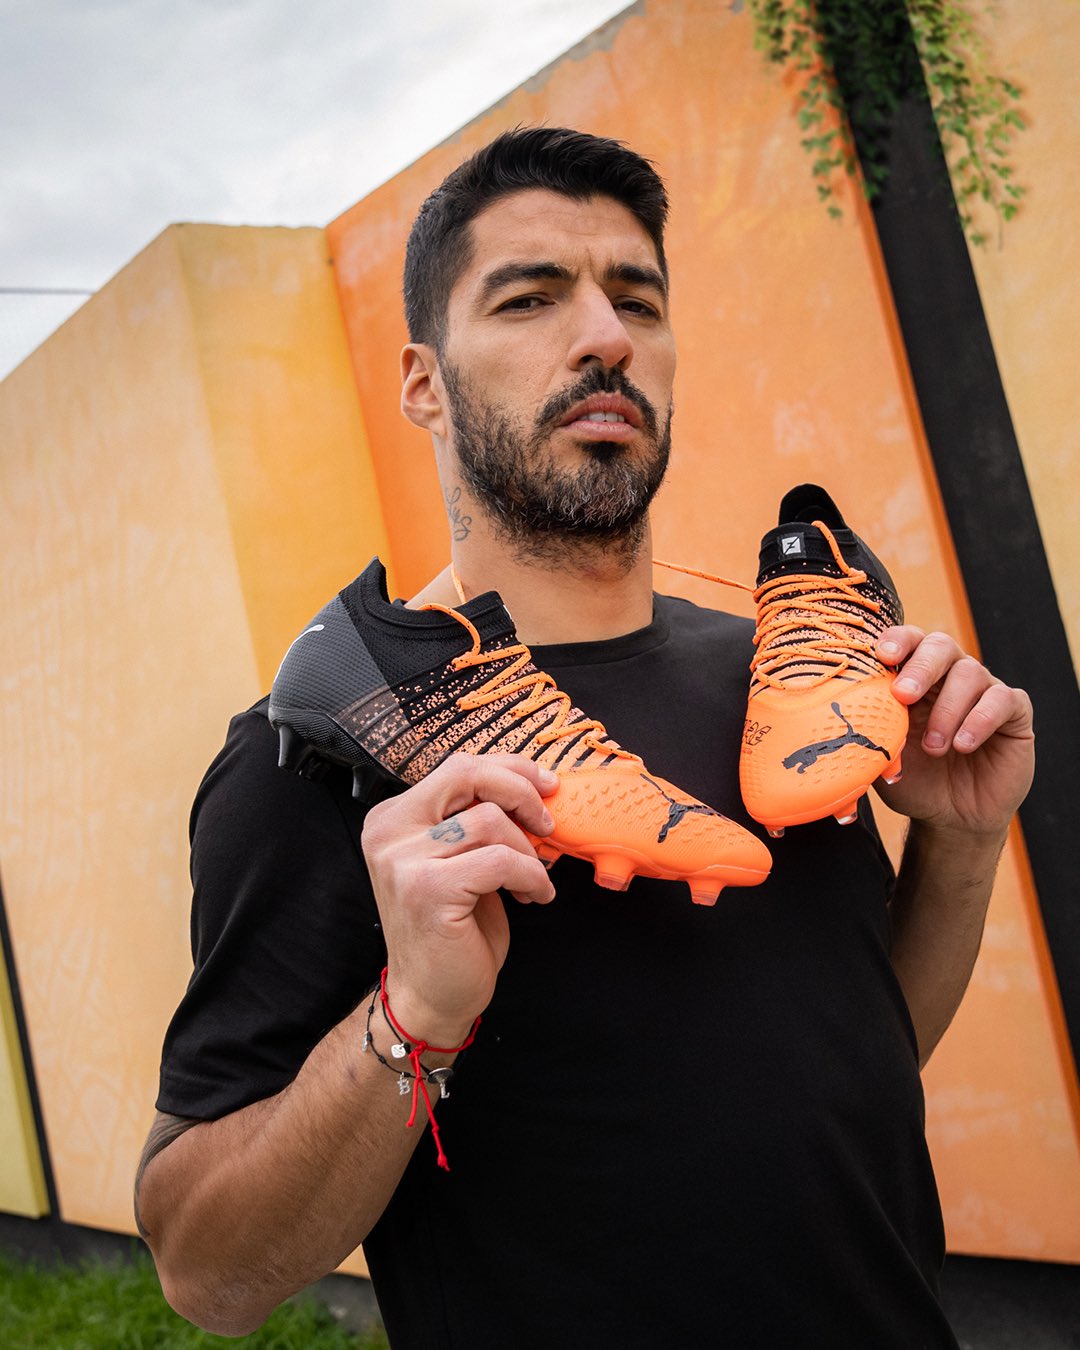 exterior Comercialización Ejecutable Luis Suárez on Twitter: "Guided by Instinct, led by FUTURE Z 🚧  @pumafootball https://t.co/wJNpW6c8we" / Twitter